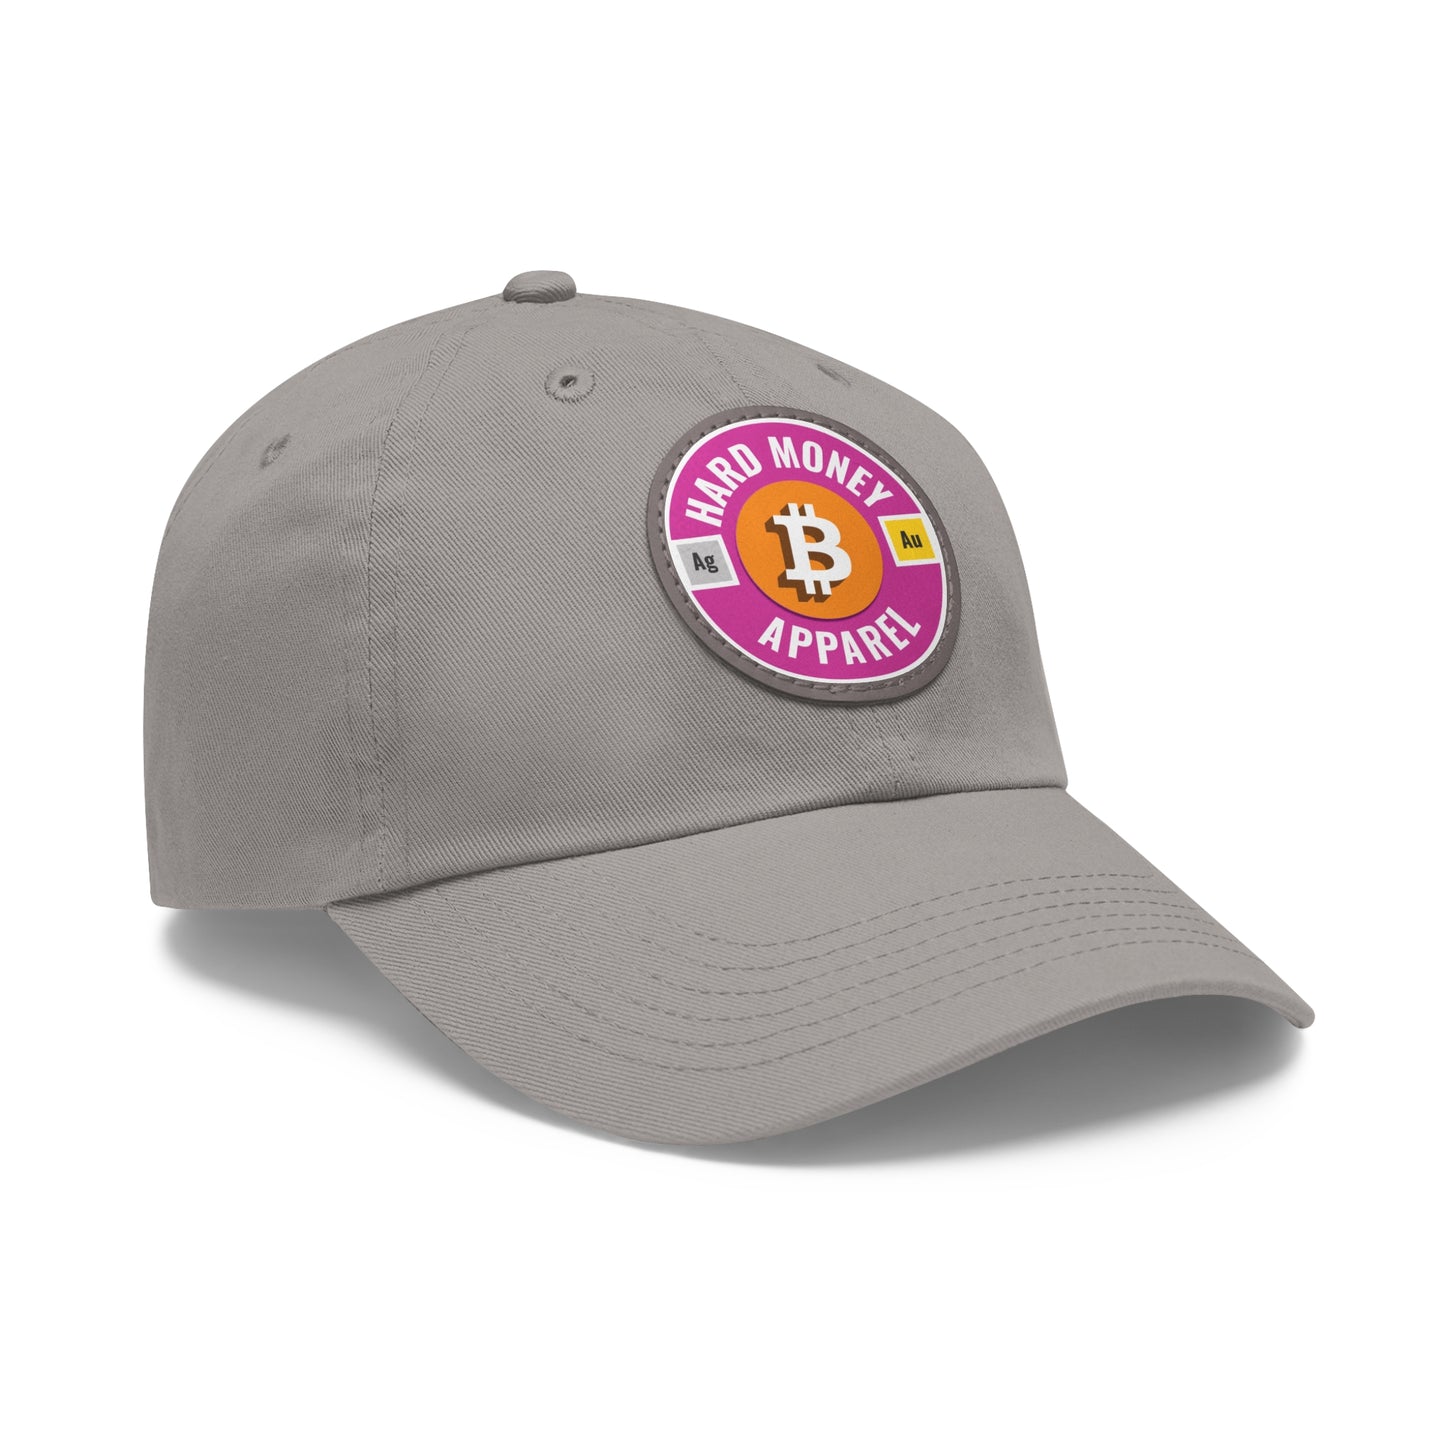 Hard Money Apparel - Pink Leather Patch Cap